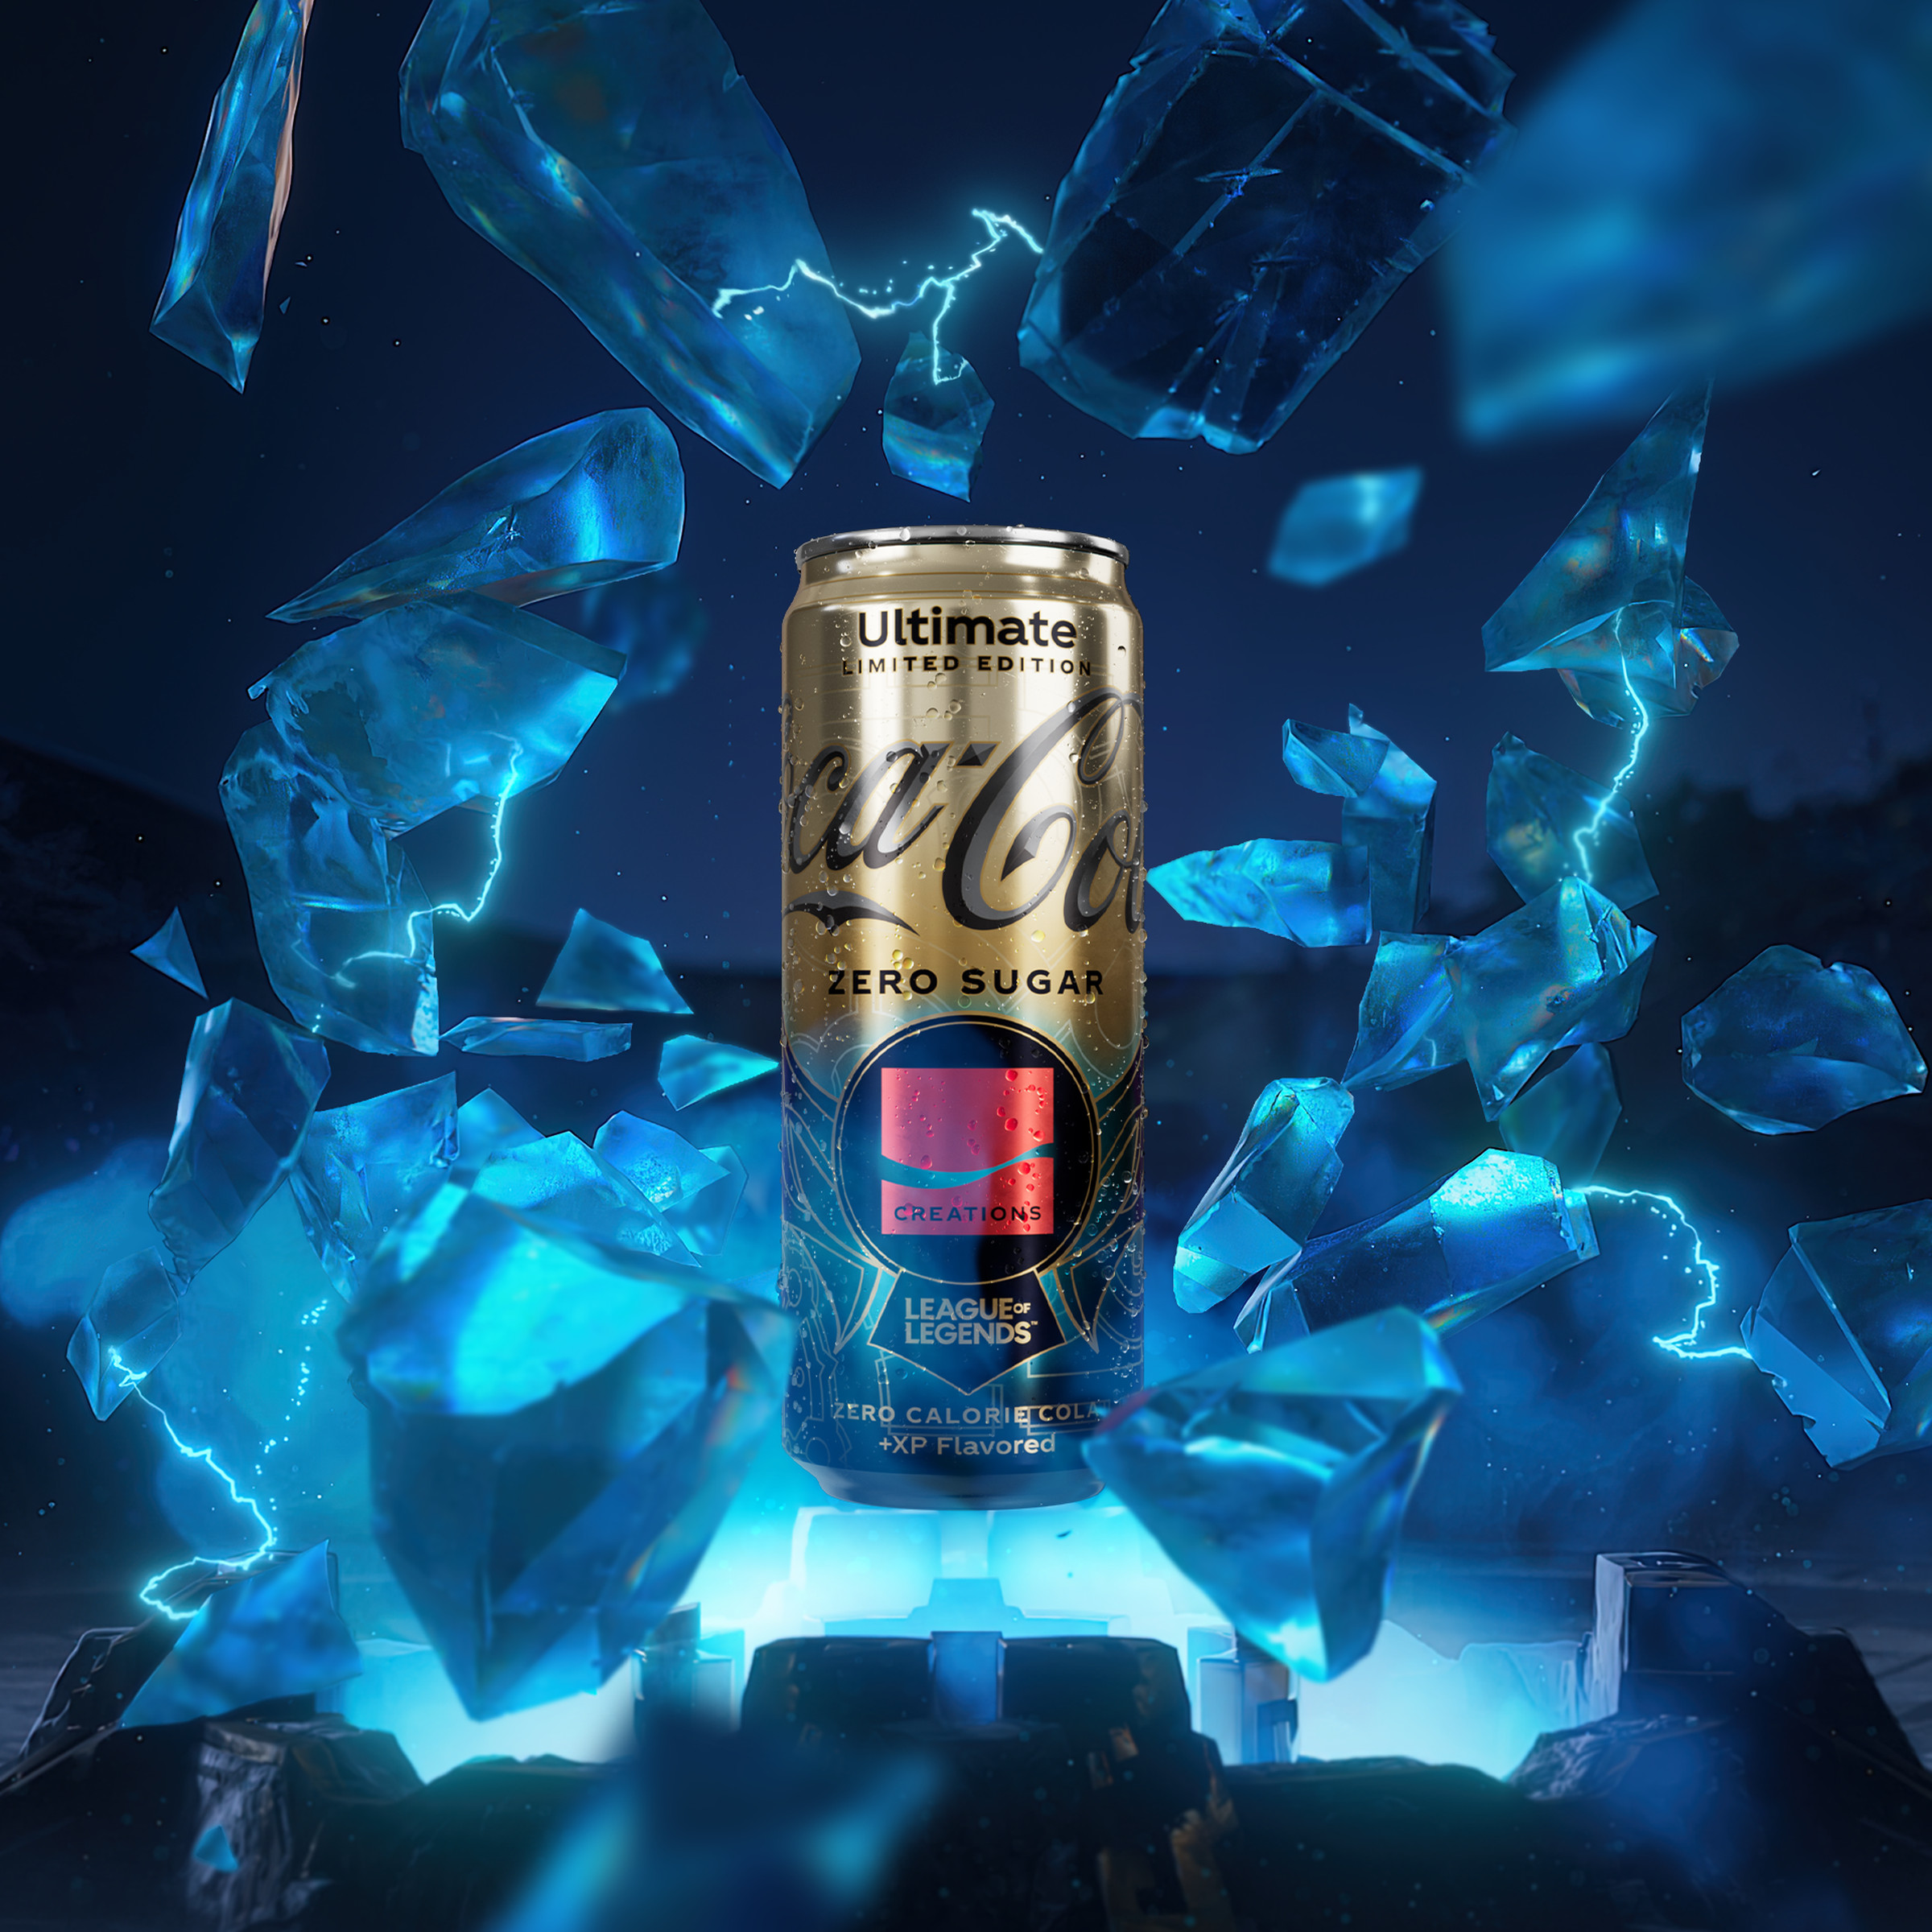 Key art of a half gold half ice-blue can of Coca-Cola that has text saying Ultimate Coca-Cola Zero Sugar Creations from a collaboration between Coca-Cola and Riot Games